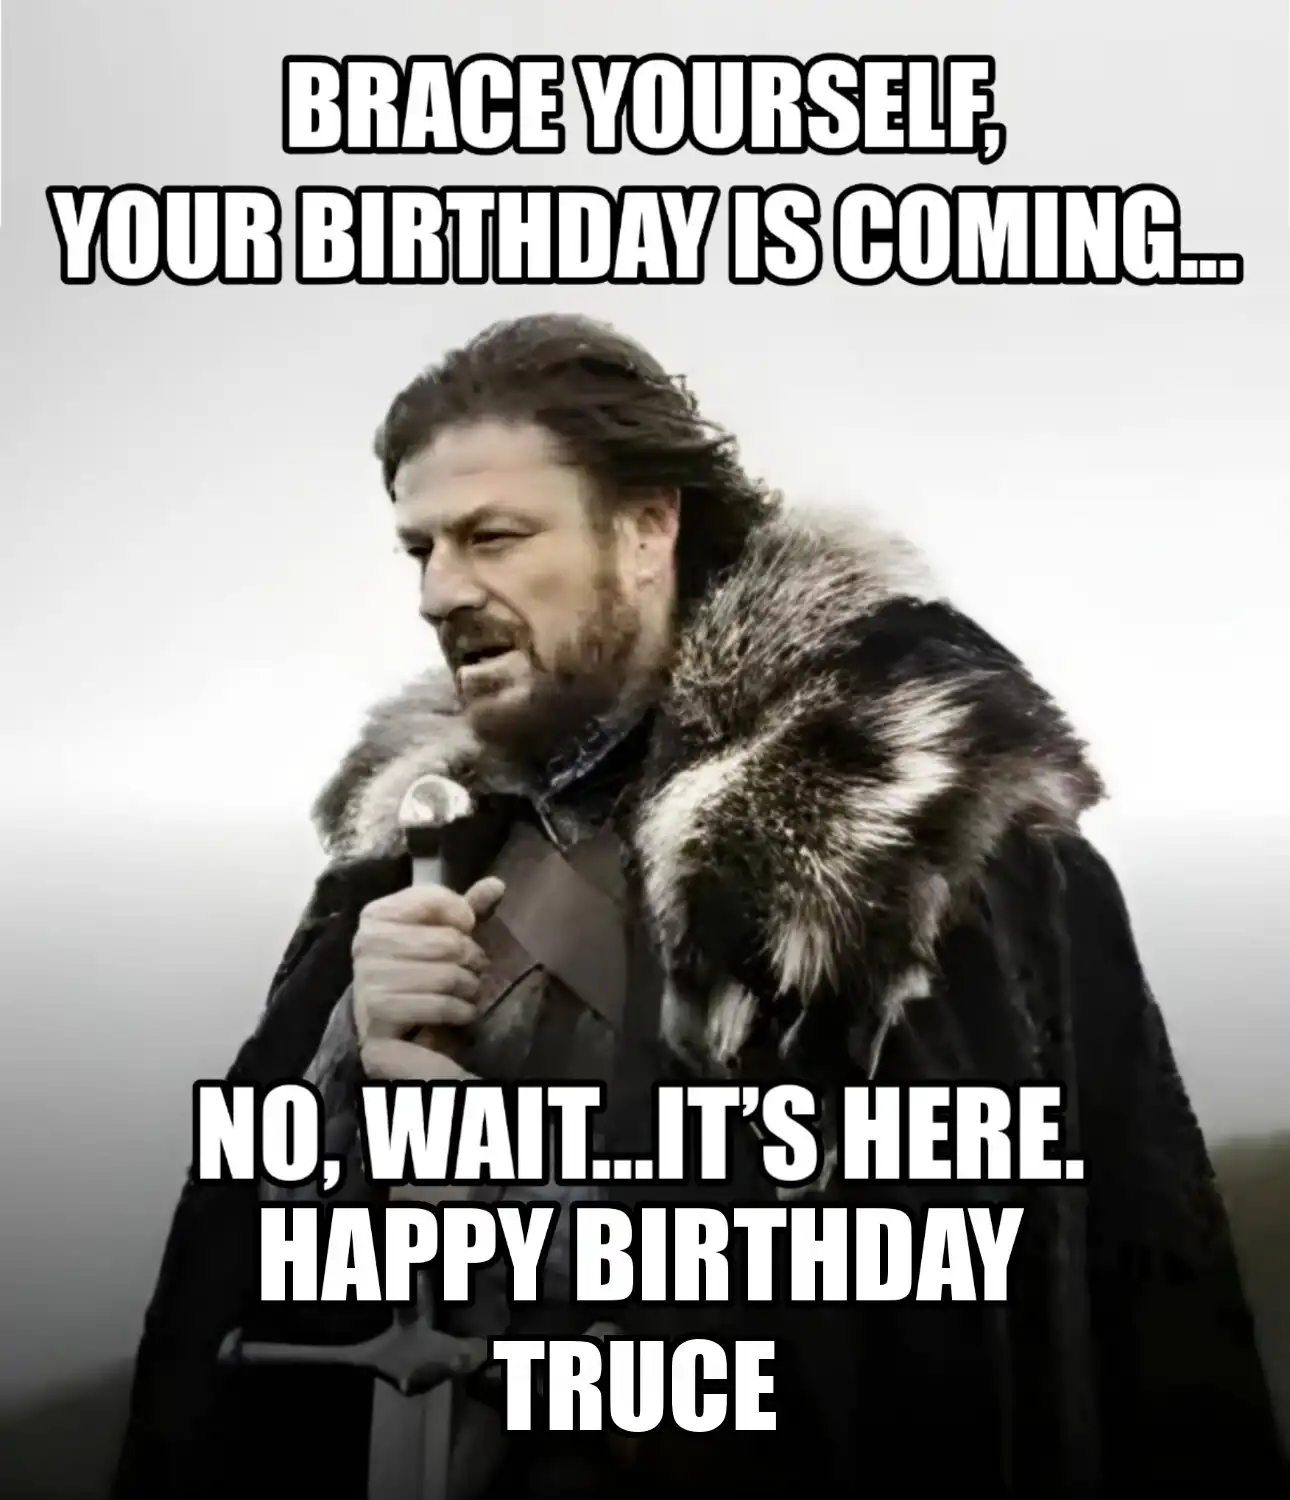 Happy Birthday Truce Brace Yourself Your Birthday Is Coming Meme